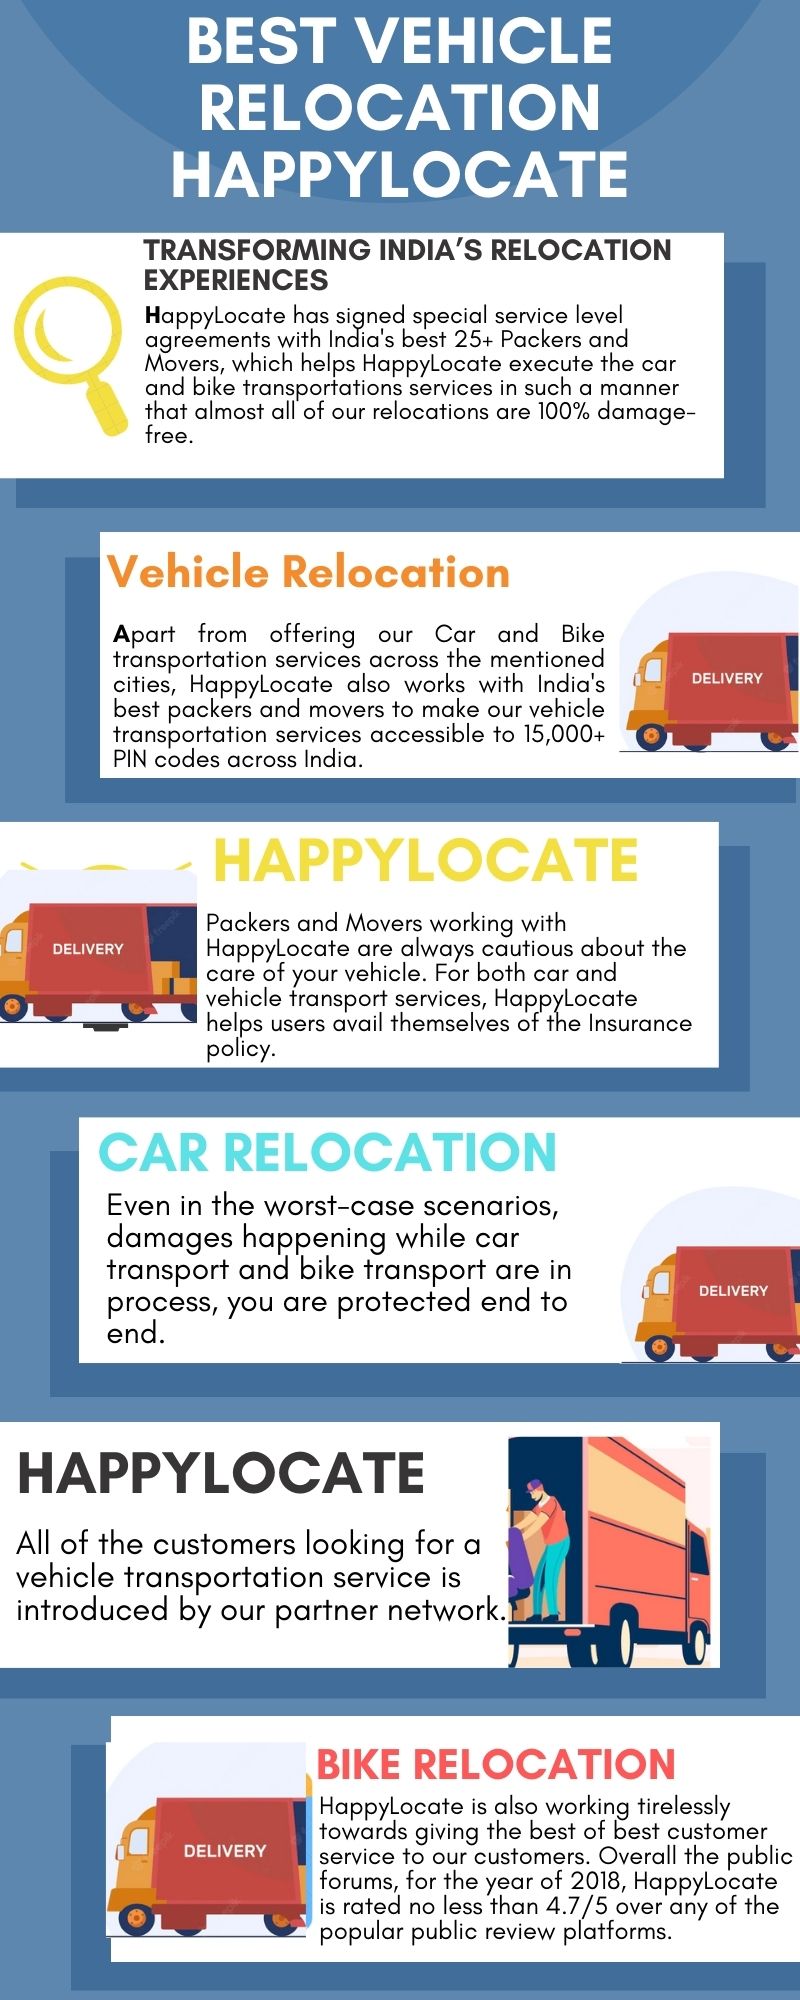 BEST VEHICLE
RELOCATION

HAPPYLOCATE

TRANSFORMING INDIA’S RELOCATION
EXPERIENCES

Happylocate has signed special service level
agreements with India’s best 25+ Packers and
Movers, which helps Happylocate execute the car
and bike transportations services in such a manner
hat almost all of our relocations are 100% damage
ree.

  
     
      
     
 
      
     
     
 
   
     
   
 

Vehicle Relocation

Apart from offering our Car and Bike
transportation services across the mentioned
cities, Happylocate also works with India's
best packers and movers to make our vehicle
transportation services accessible to 15,000+
PIN codes across India.

Packers and Movers working with

| [pr Happylocate are always cautious about the
care of your vehicle. For both car and
vehicle transport services, Happylocate

helps users avail themselves of the Insurance

policy.

  

  

Even in the worst-case scenarios,
damages happening while car

transport and bike transport are in
process, you are protected end to
end.

  
  

   

| rere

A. EER

HAPPYLOCATE NI™,
All of the customers looking for a )
vehicle transportation service is

introduced by our partner network

  
   

BIKE RELOCATION

Happylocate is also working tirelessly

a towards giving the best of best customer
LE service to our customers. Overall the public

forums, for the year of 2018, Happylocate

is rated no less than 4.7/5 over any of the

popular public review platforms.